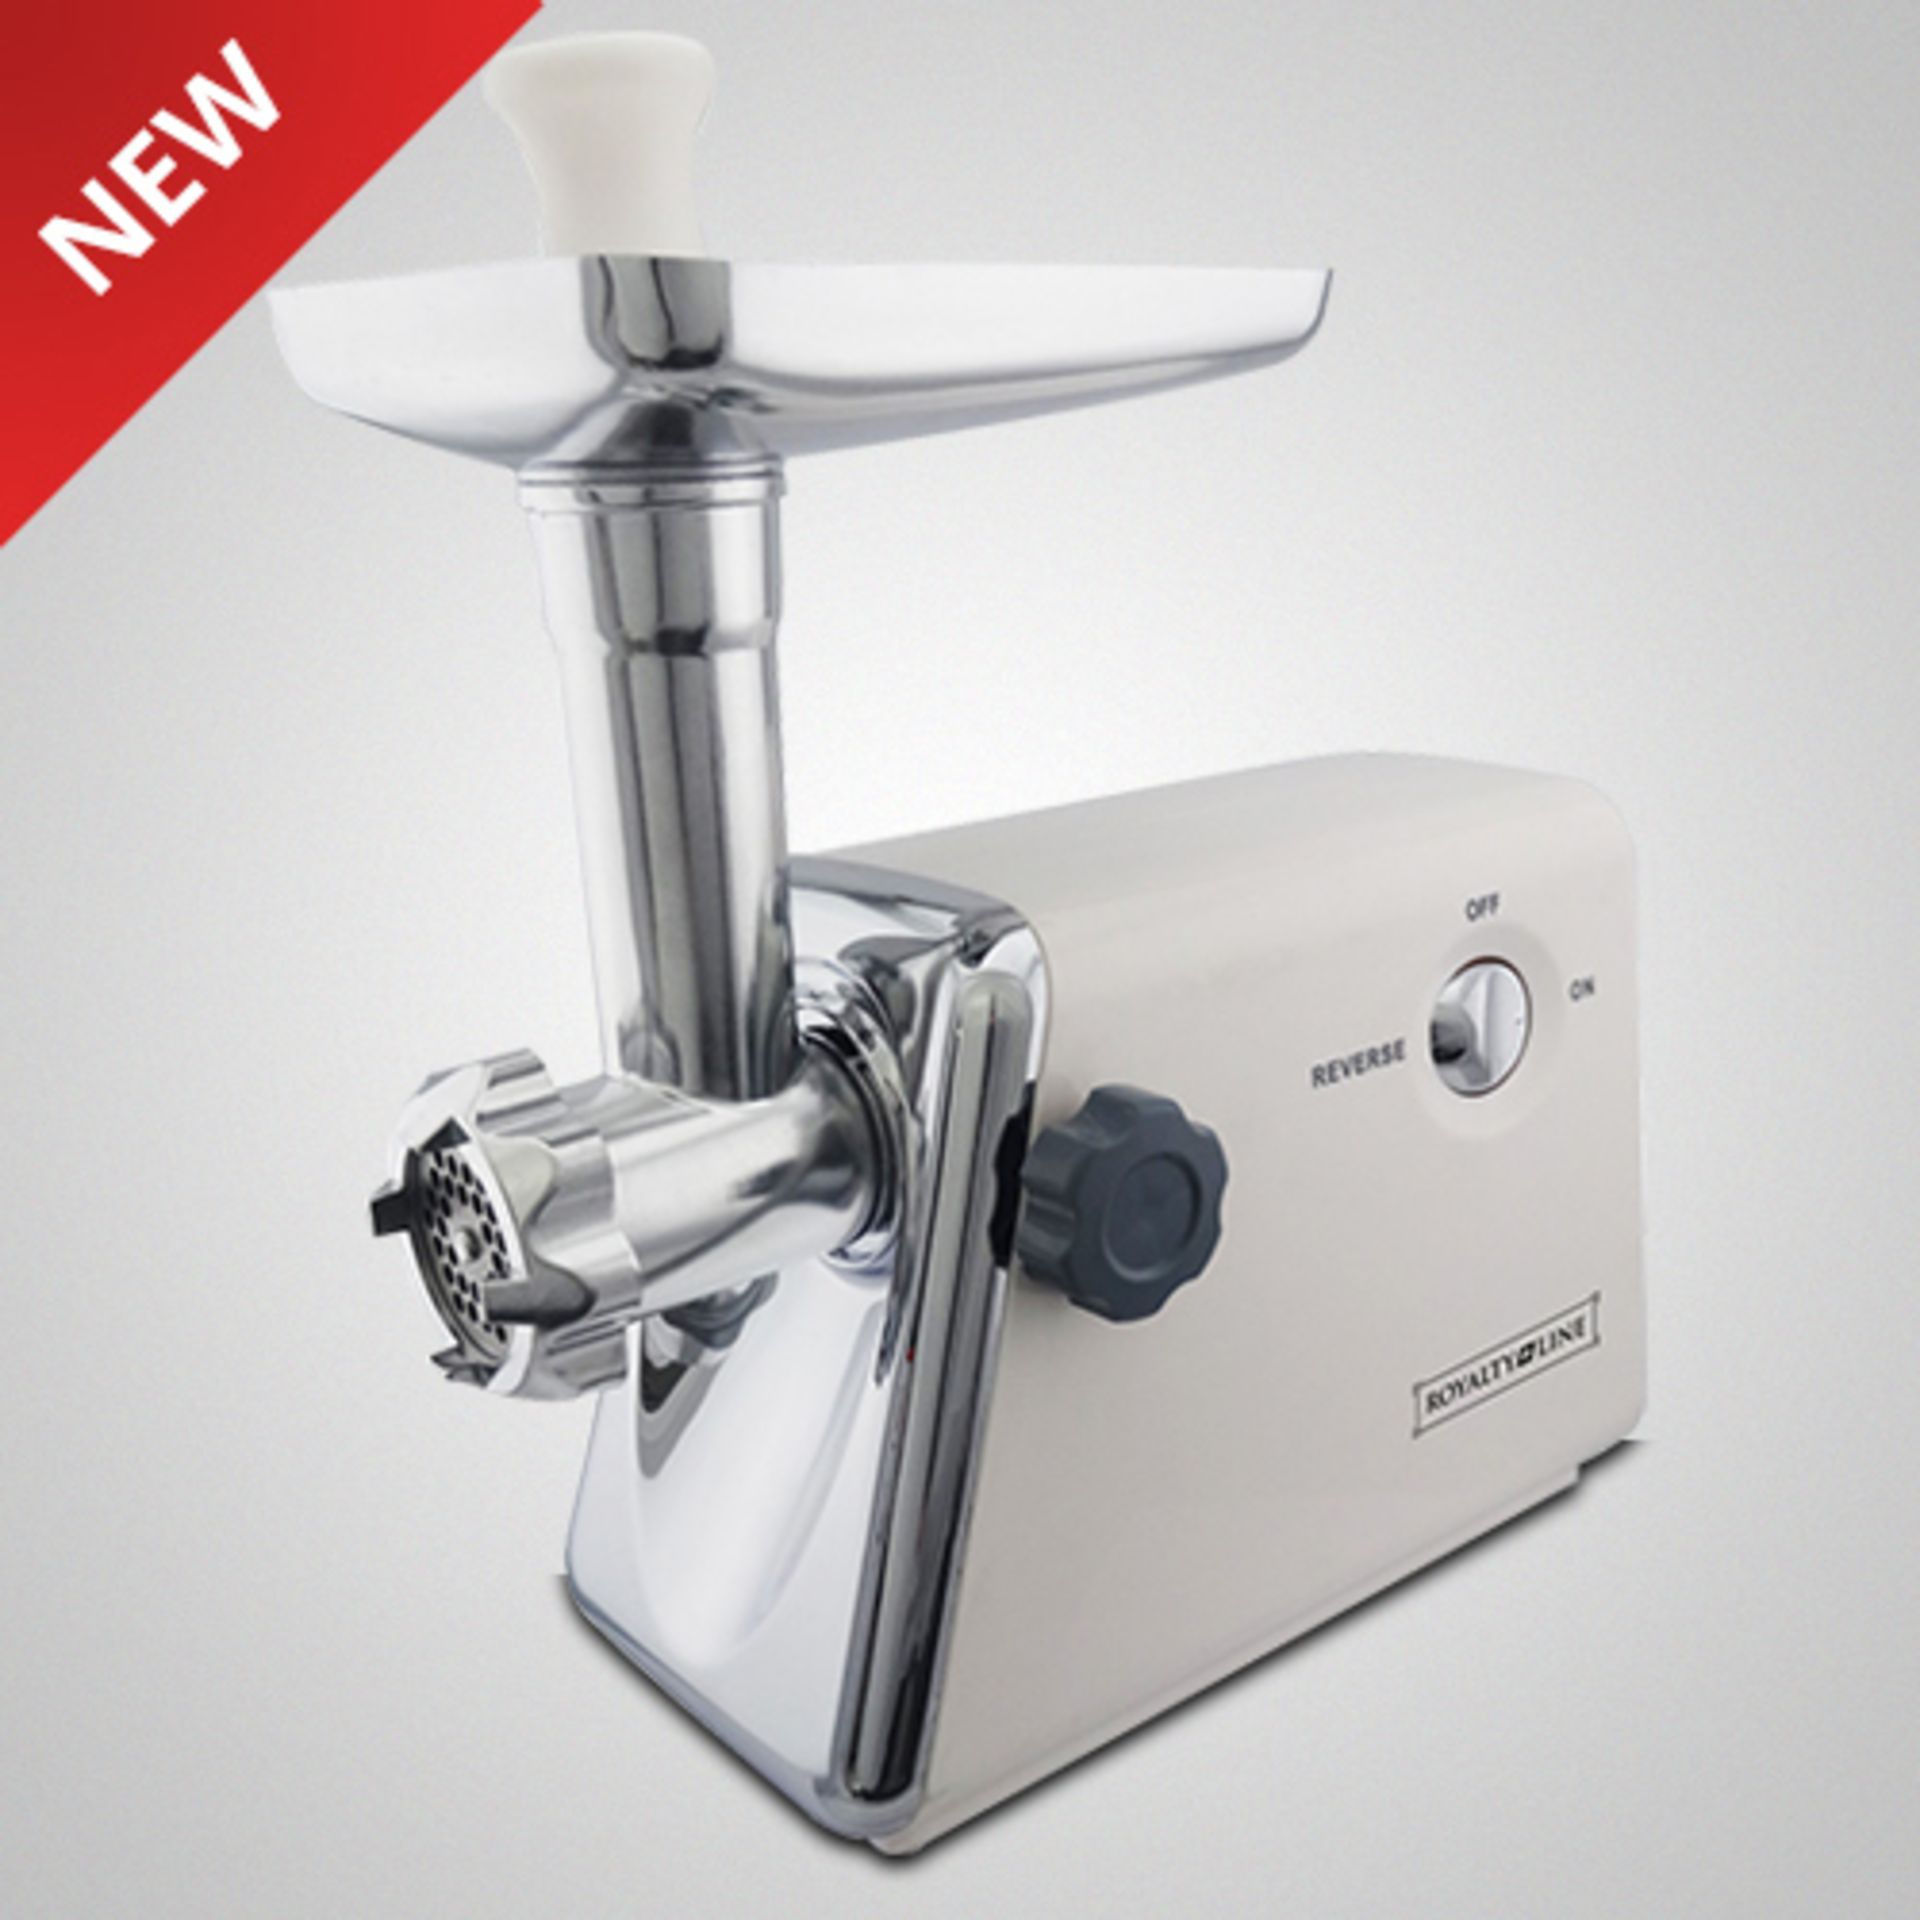 V Brand New Royalty Line Meat Ginder And Mincer With Stainless Steel Blades Colour May Vary